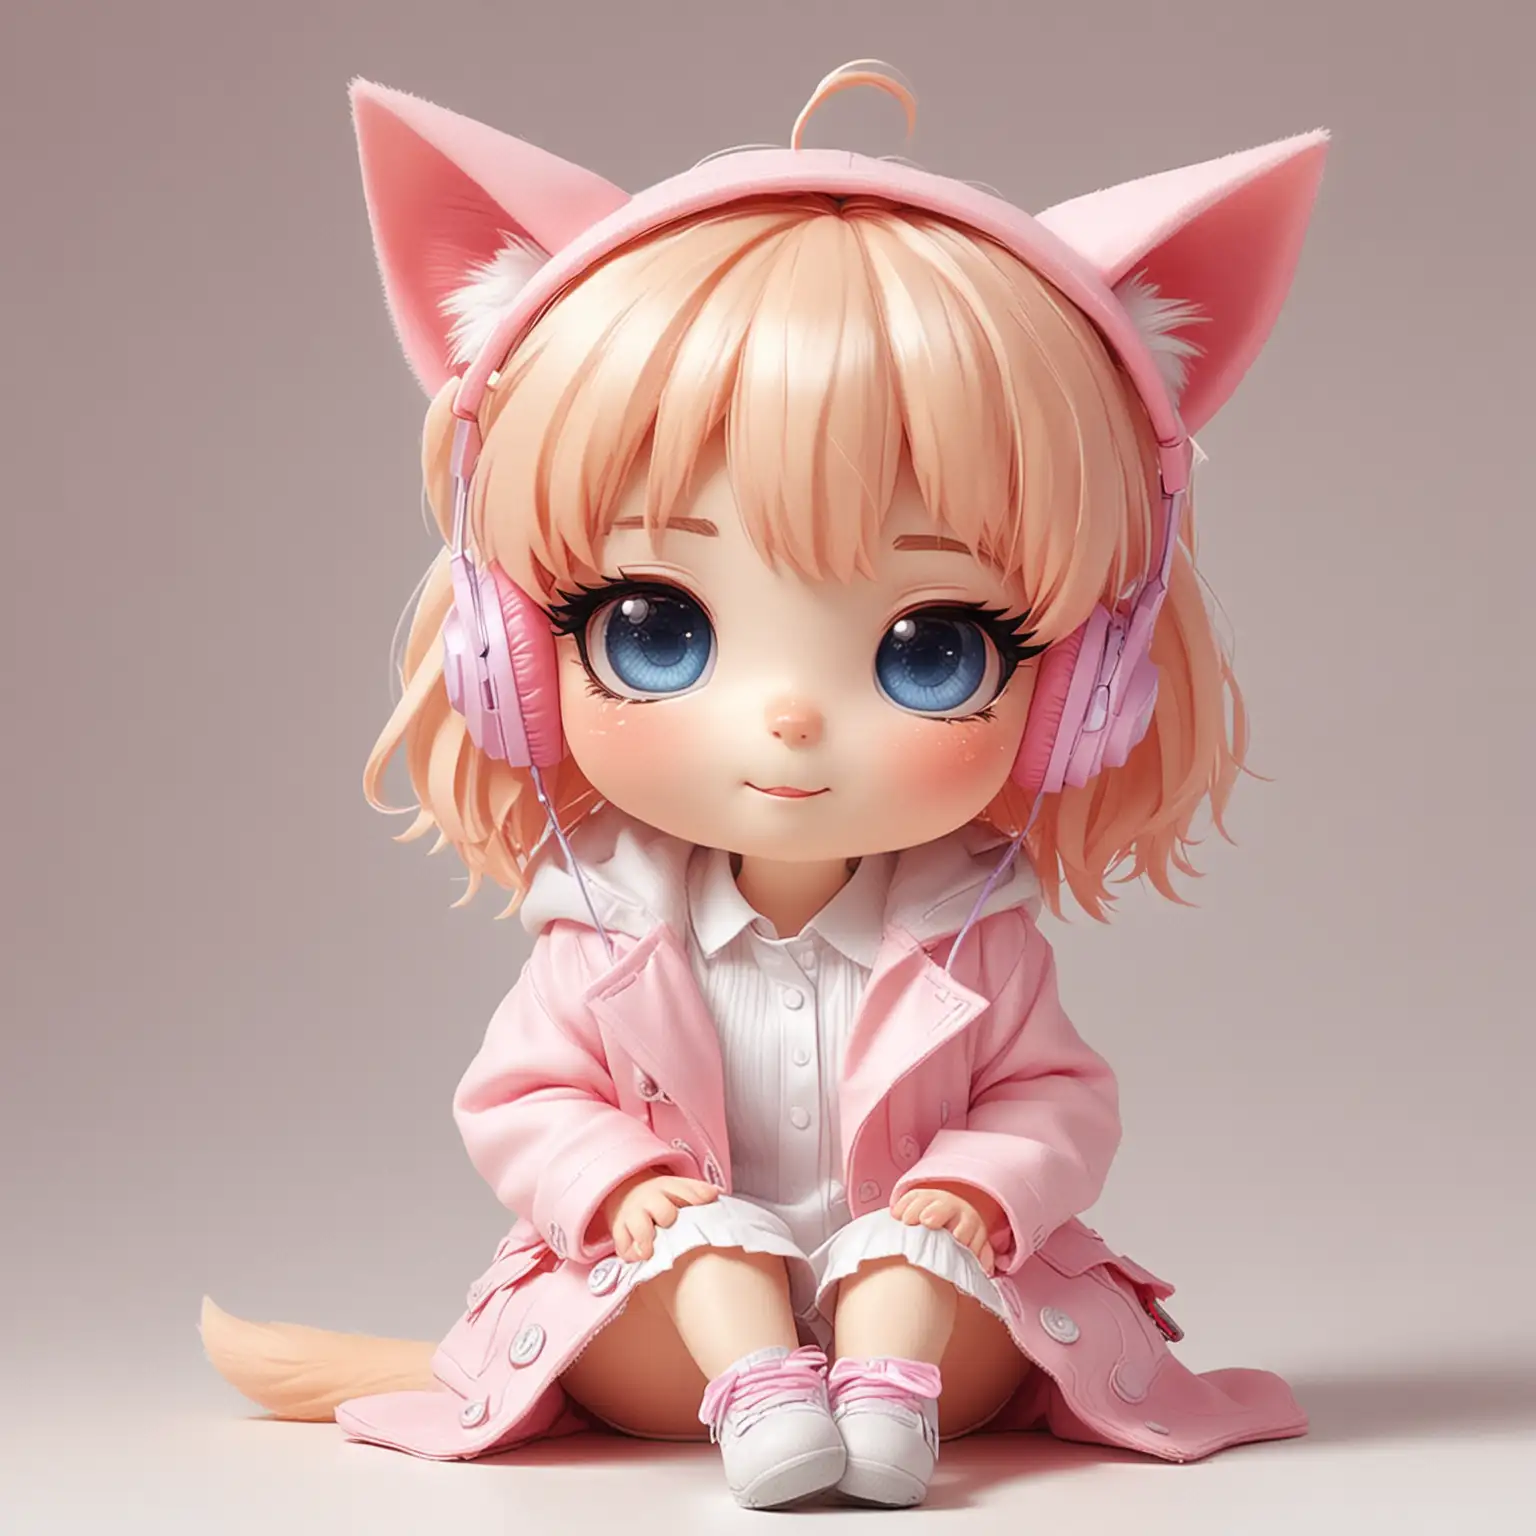 chibi character, blonde hair, plain white dress, loose pink oversize jacket, pink headphones, pink eye glasses, cat ears, white background, pastel, short hair, super messy hair, painting picture, strawberry hair pin, blue eyes, lively smile, fangs, sitting, open shoulder, thick line art, cel-shading

